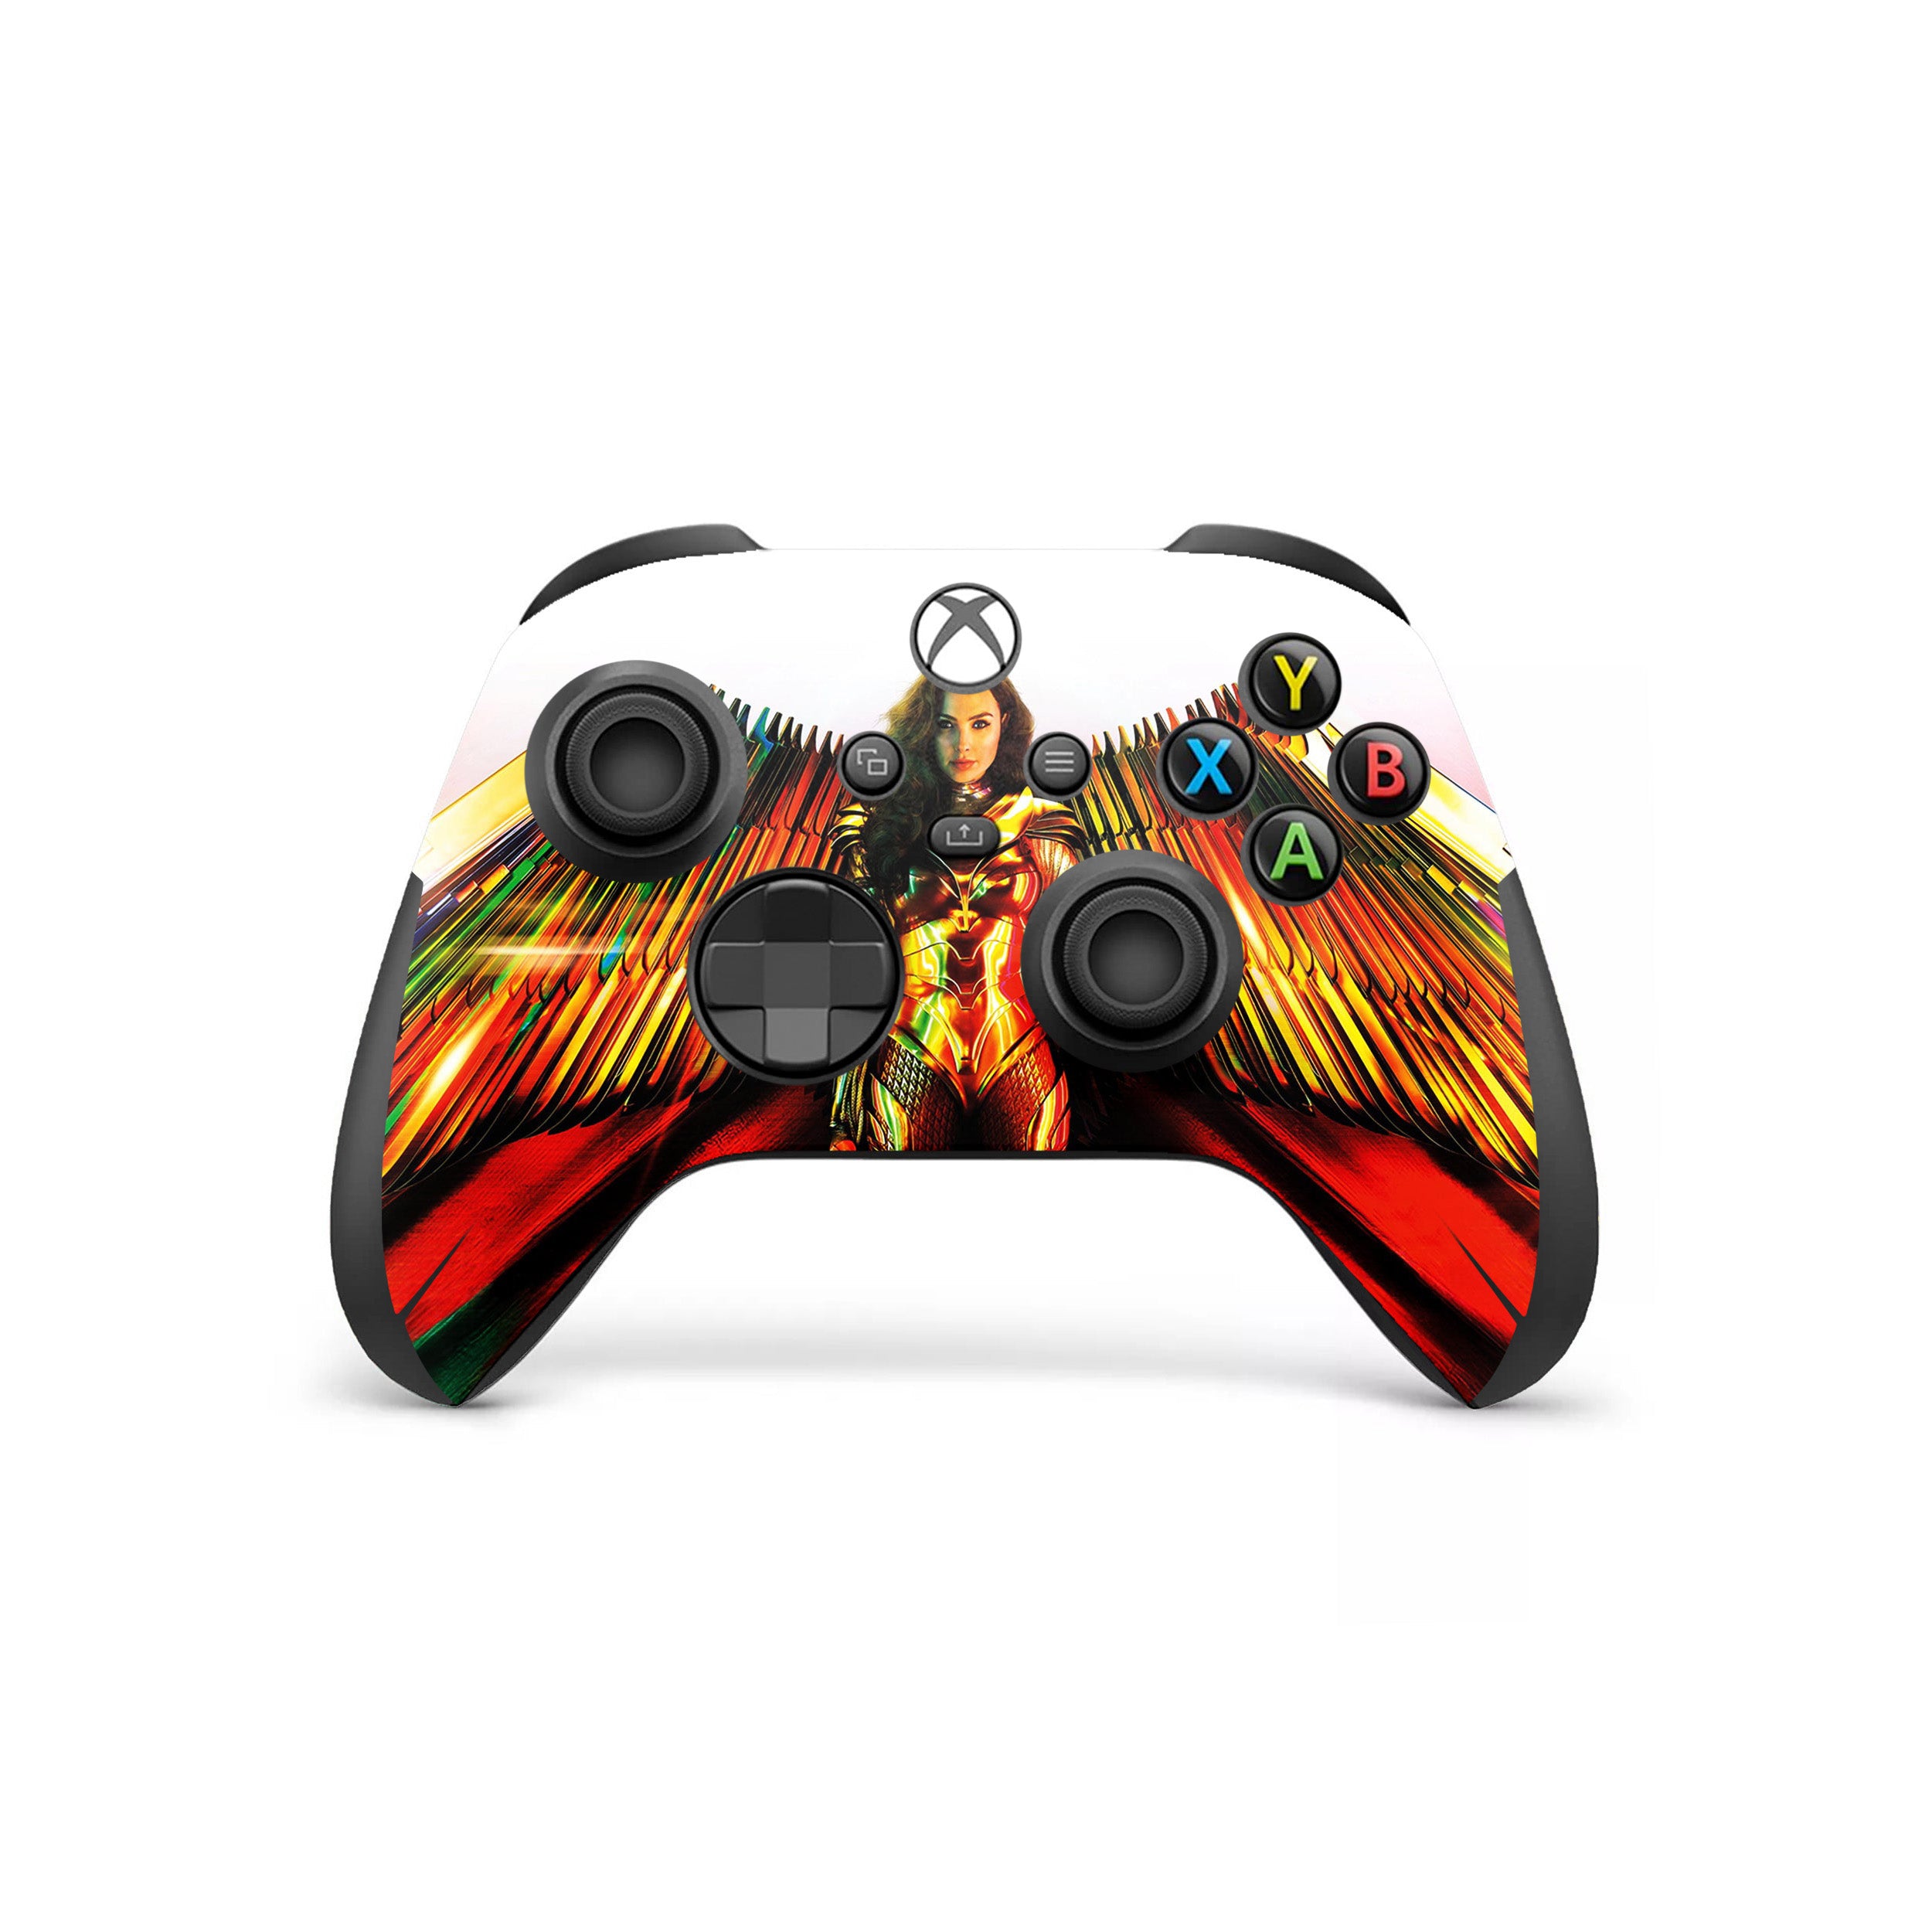 A video game skin featuring a DC Comics Wonder Woman design for the Xbox Wireless Controller.